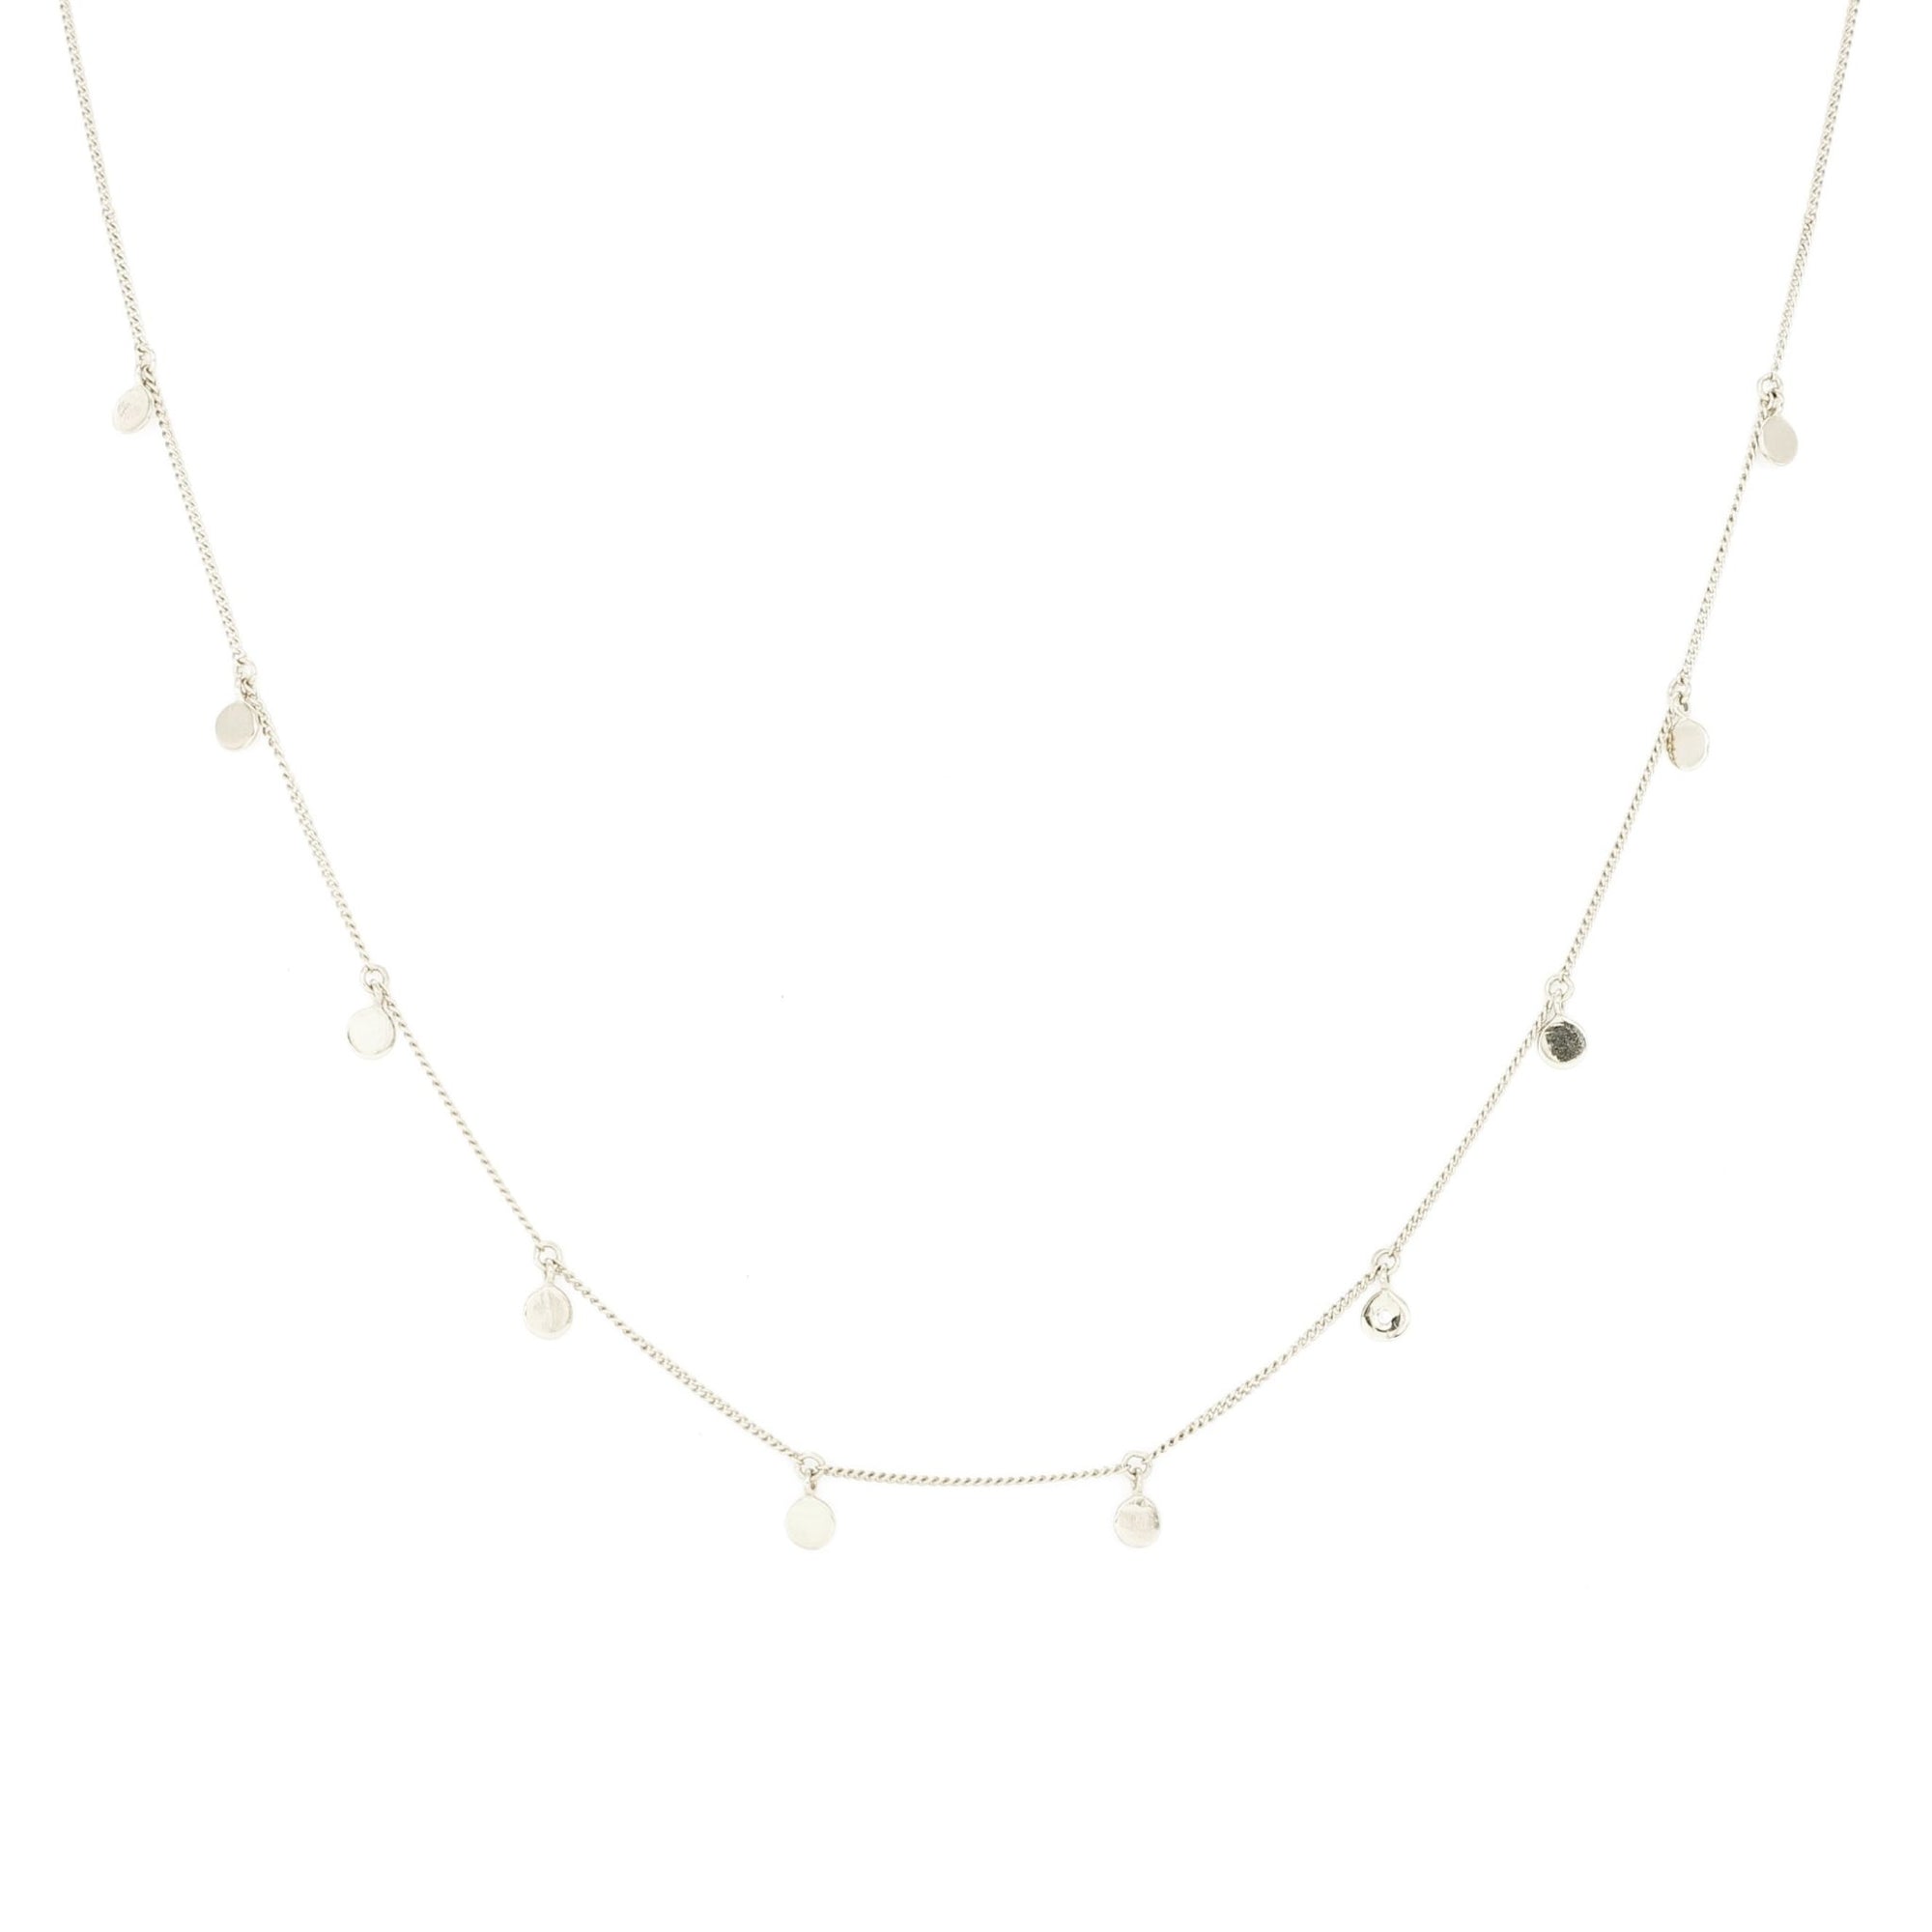 DAINTY POISE DISK NECKLACE - CUBIC ZIRCONIA & SILVER - SO PRETTY CARA COTTER